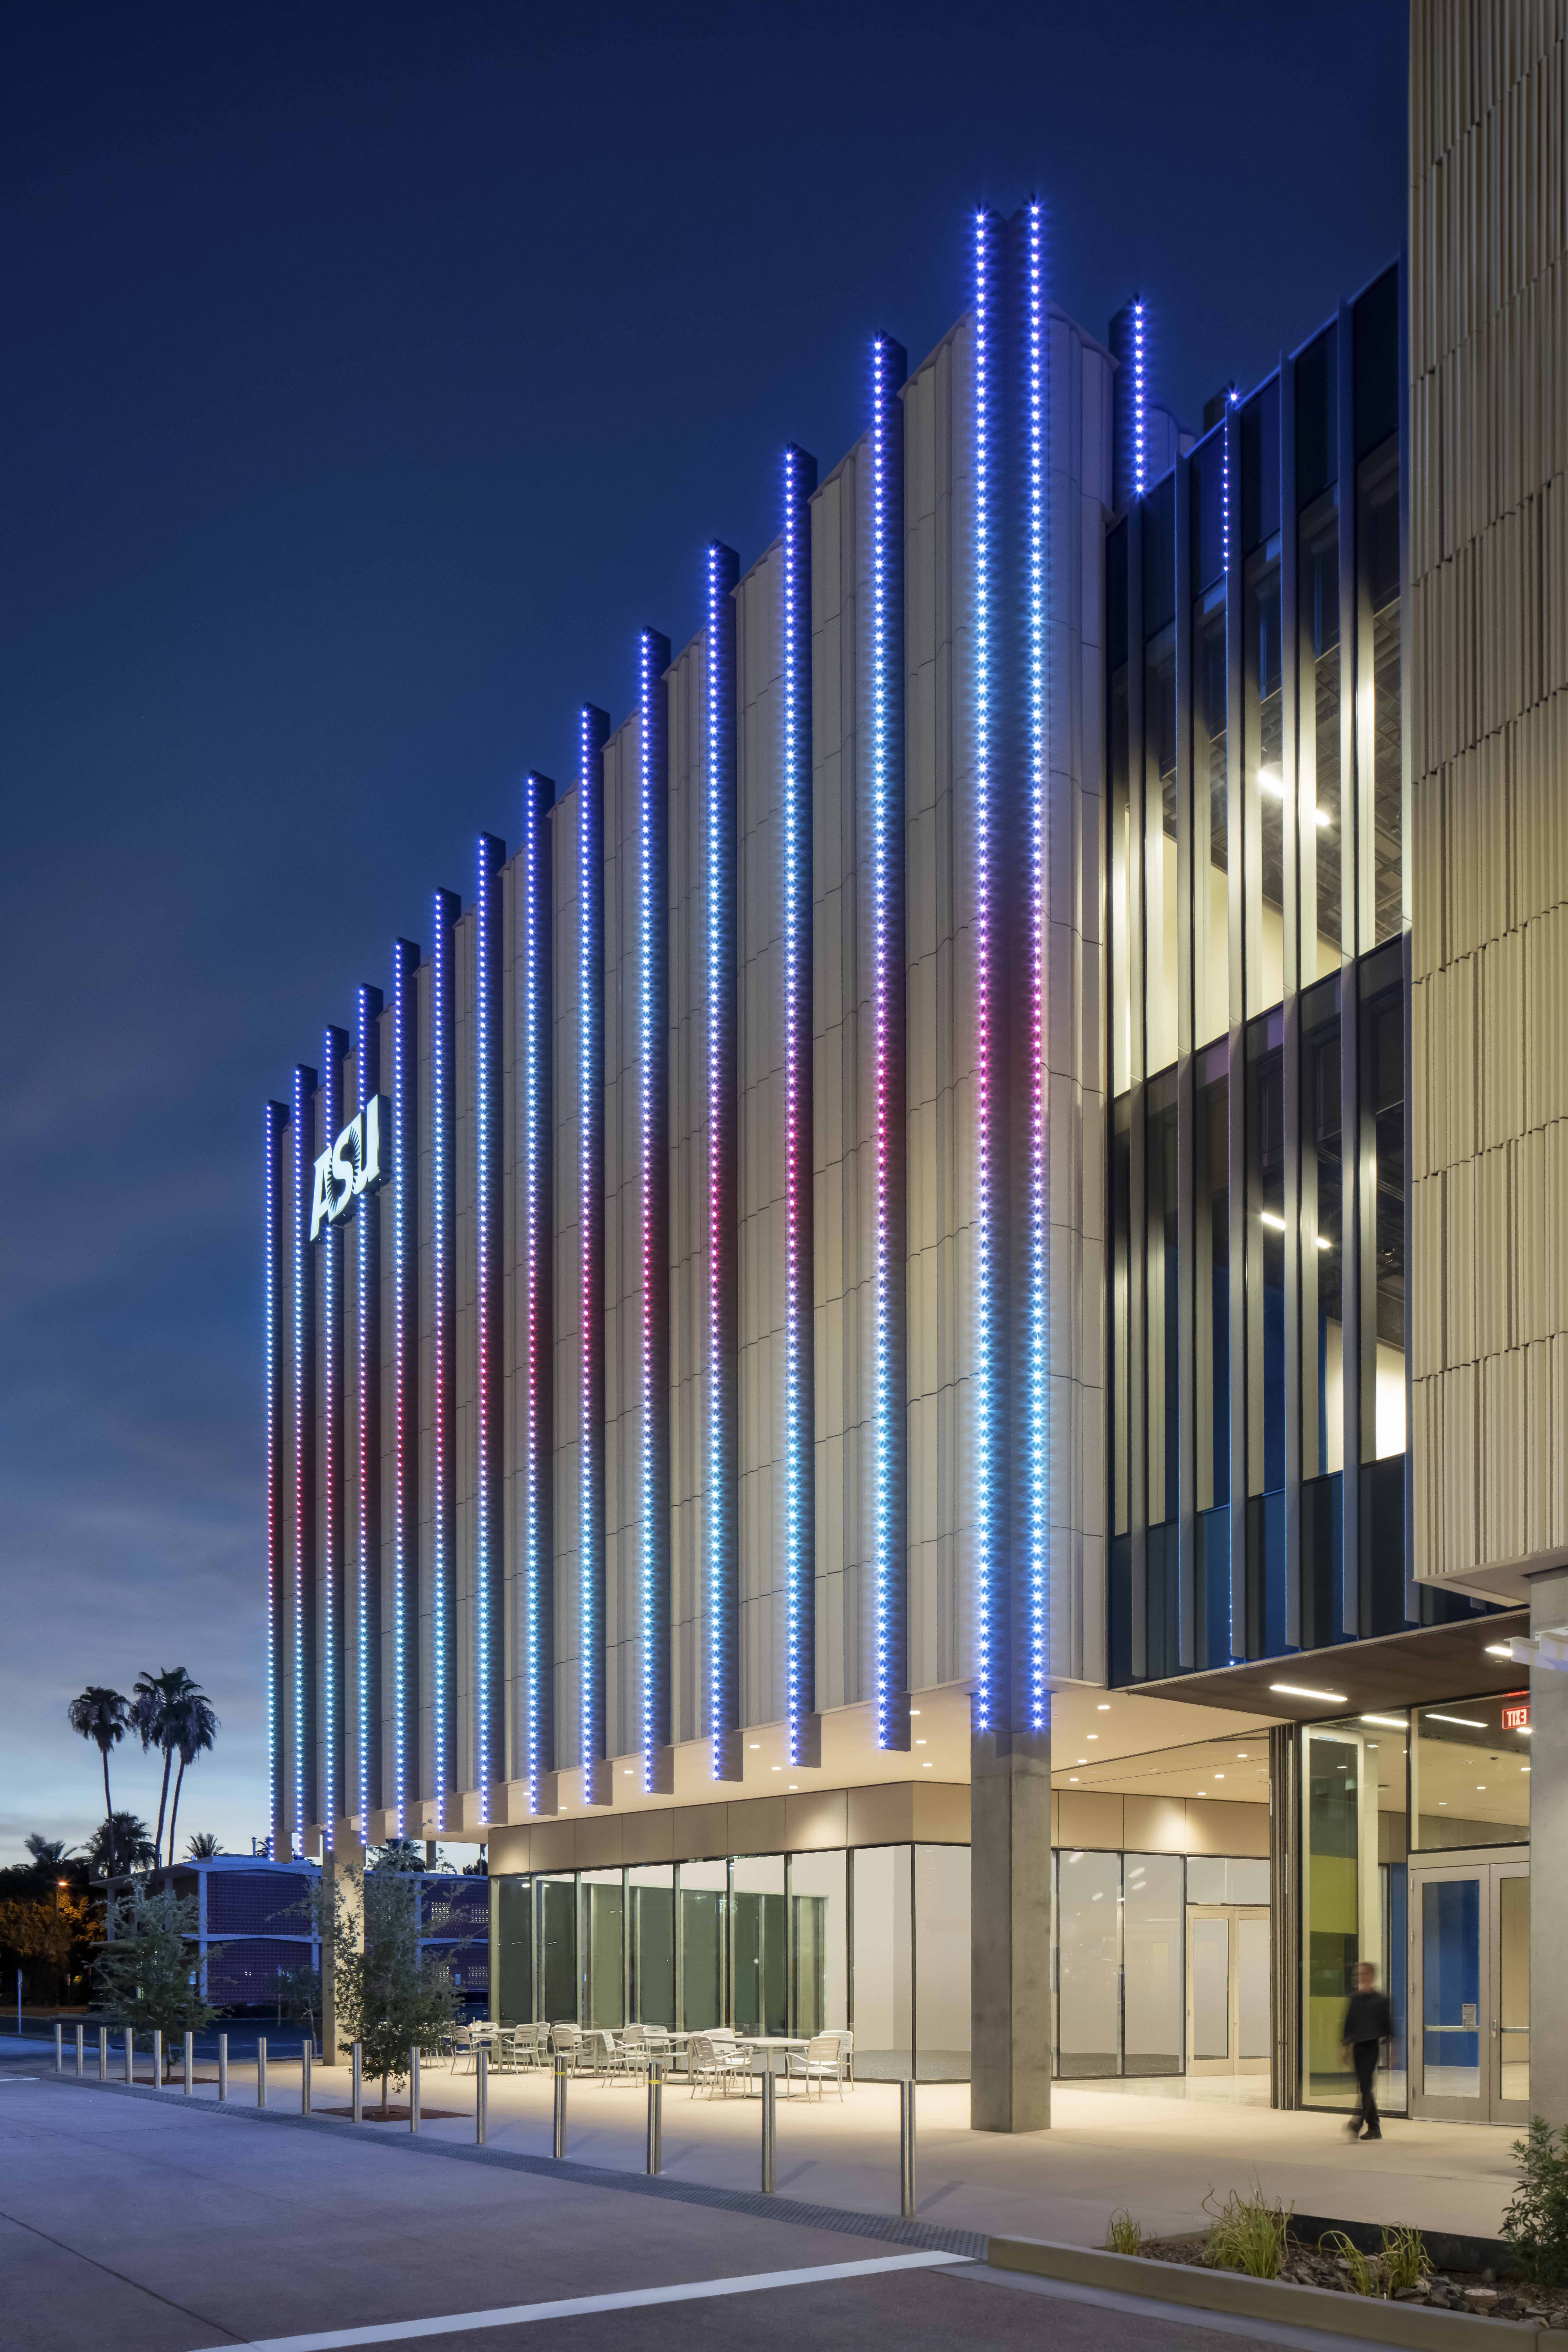 Reflecting the media and digital technology emphasis of the school, the southwest façade of the building is wrapped in a programmable array of RGB color changeable “dots”, essentially creating a large low res screen. ASU, Media & Immersive eXperience (MIX) Center, Mesa, Arizona © Grey Shed